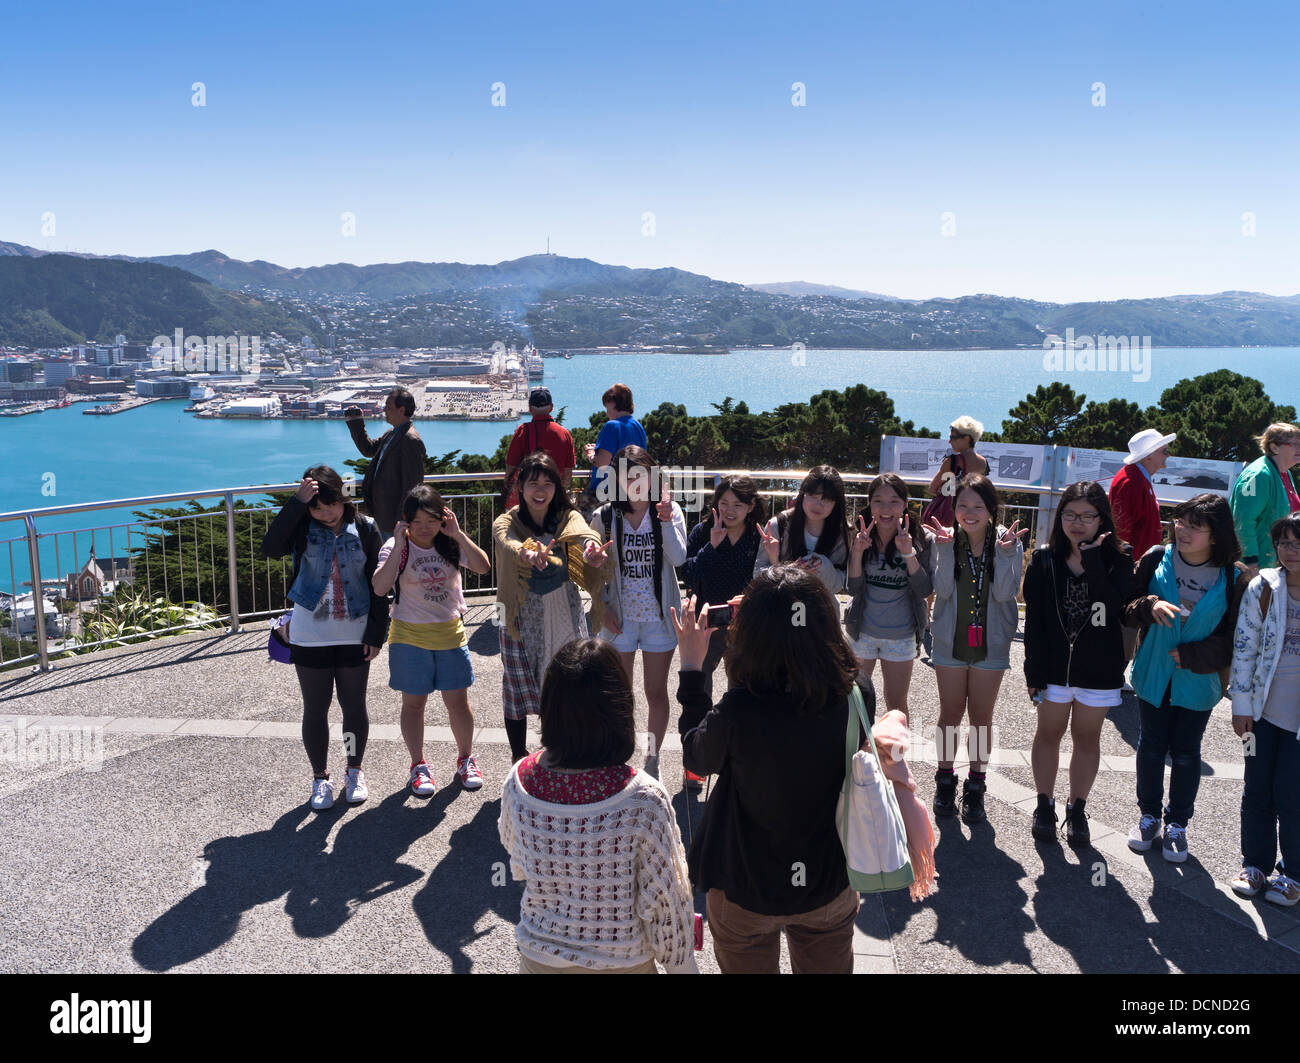 dh Mount Victoria WELLINGTON NEW ZEALAND Lookout Japanese teenager girl tourists picture taking view tourist snapshots Stock Photo